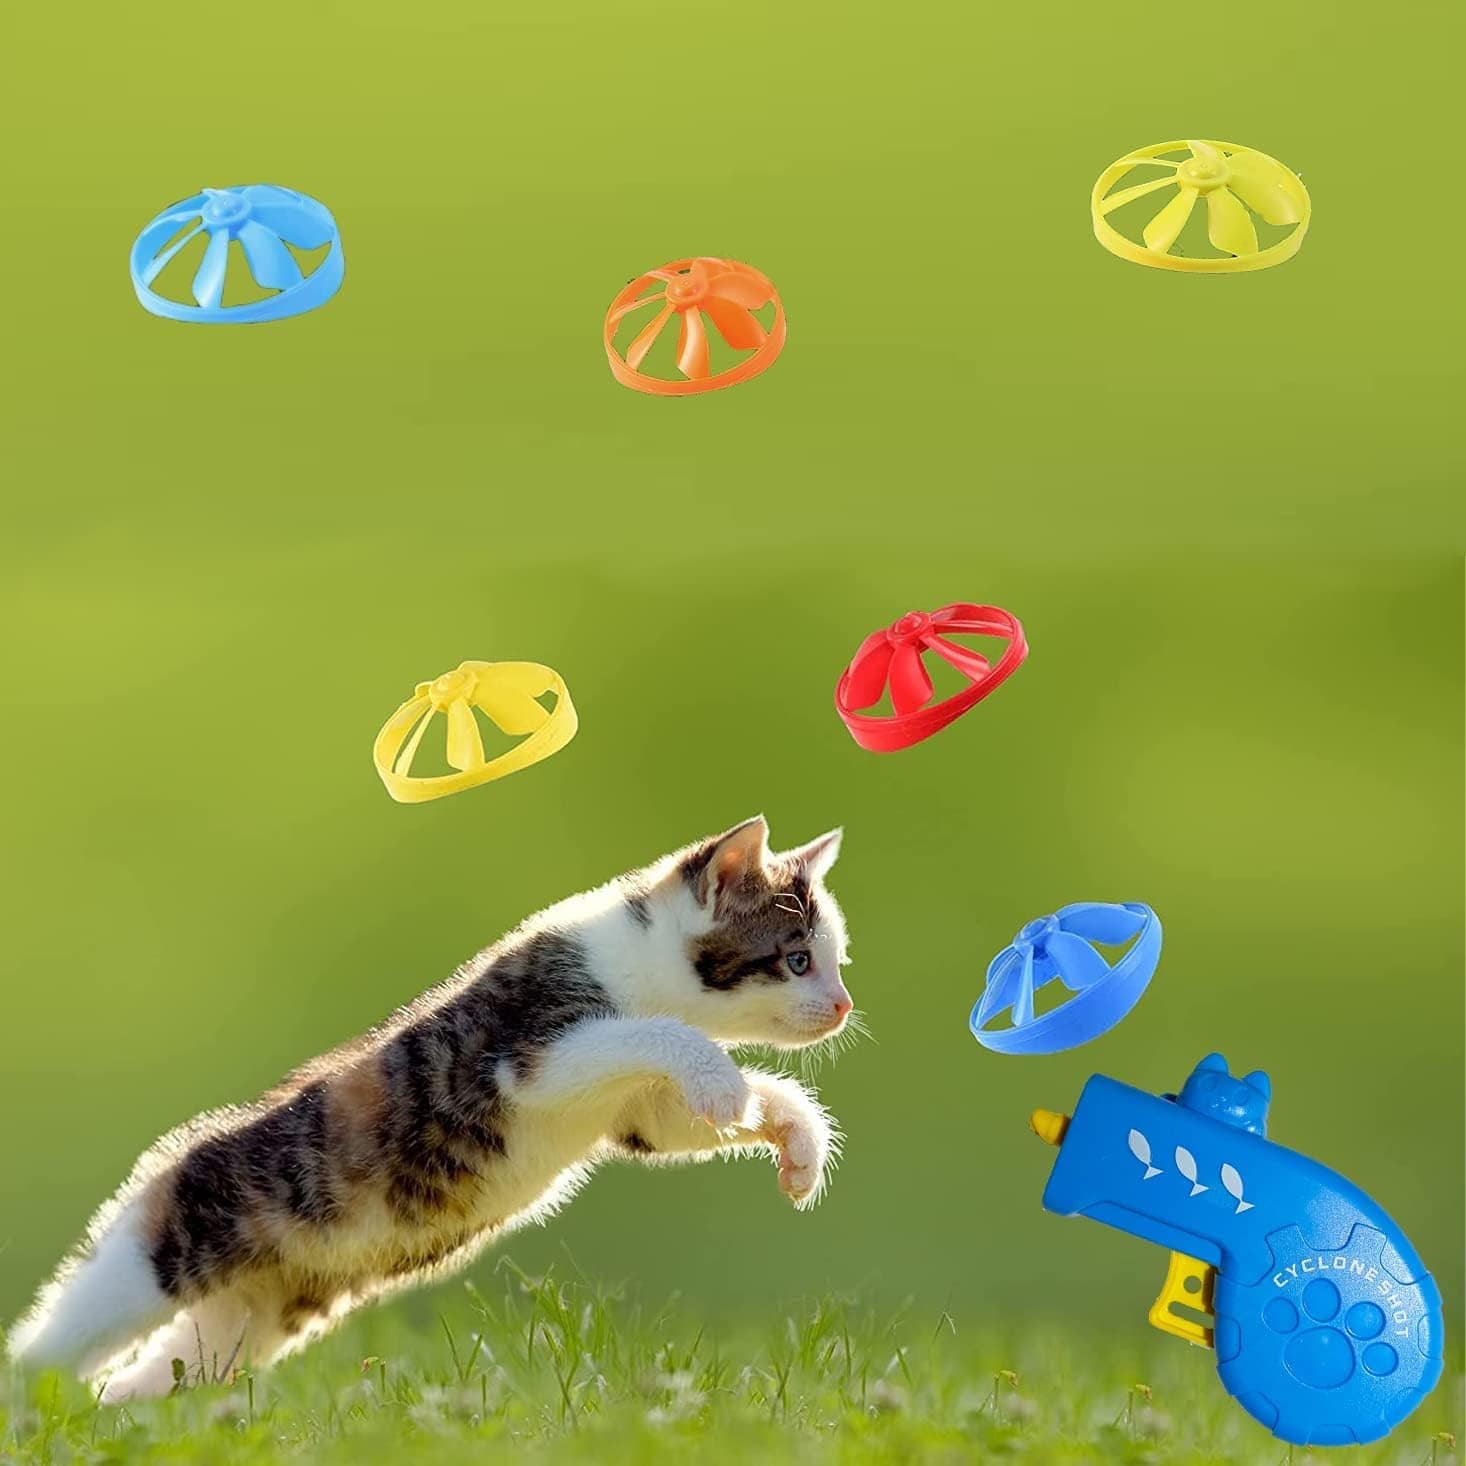 KUTKUT 6 Pieces Cat Fetch Toy with 5 Colorful Flying Propellers Set- Cat TracksToy - Fun Levels of Interactive Play Cat Toys Satisfies Kitty's Hunting, Chasing & Exercising-Toys-kutkutstyle